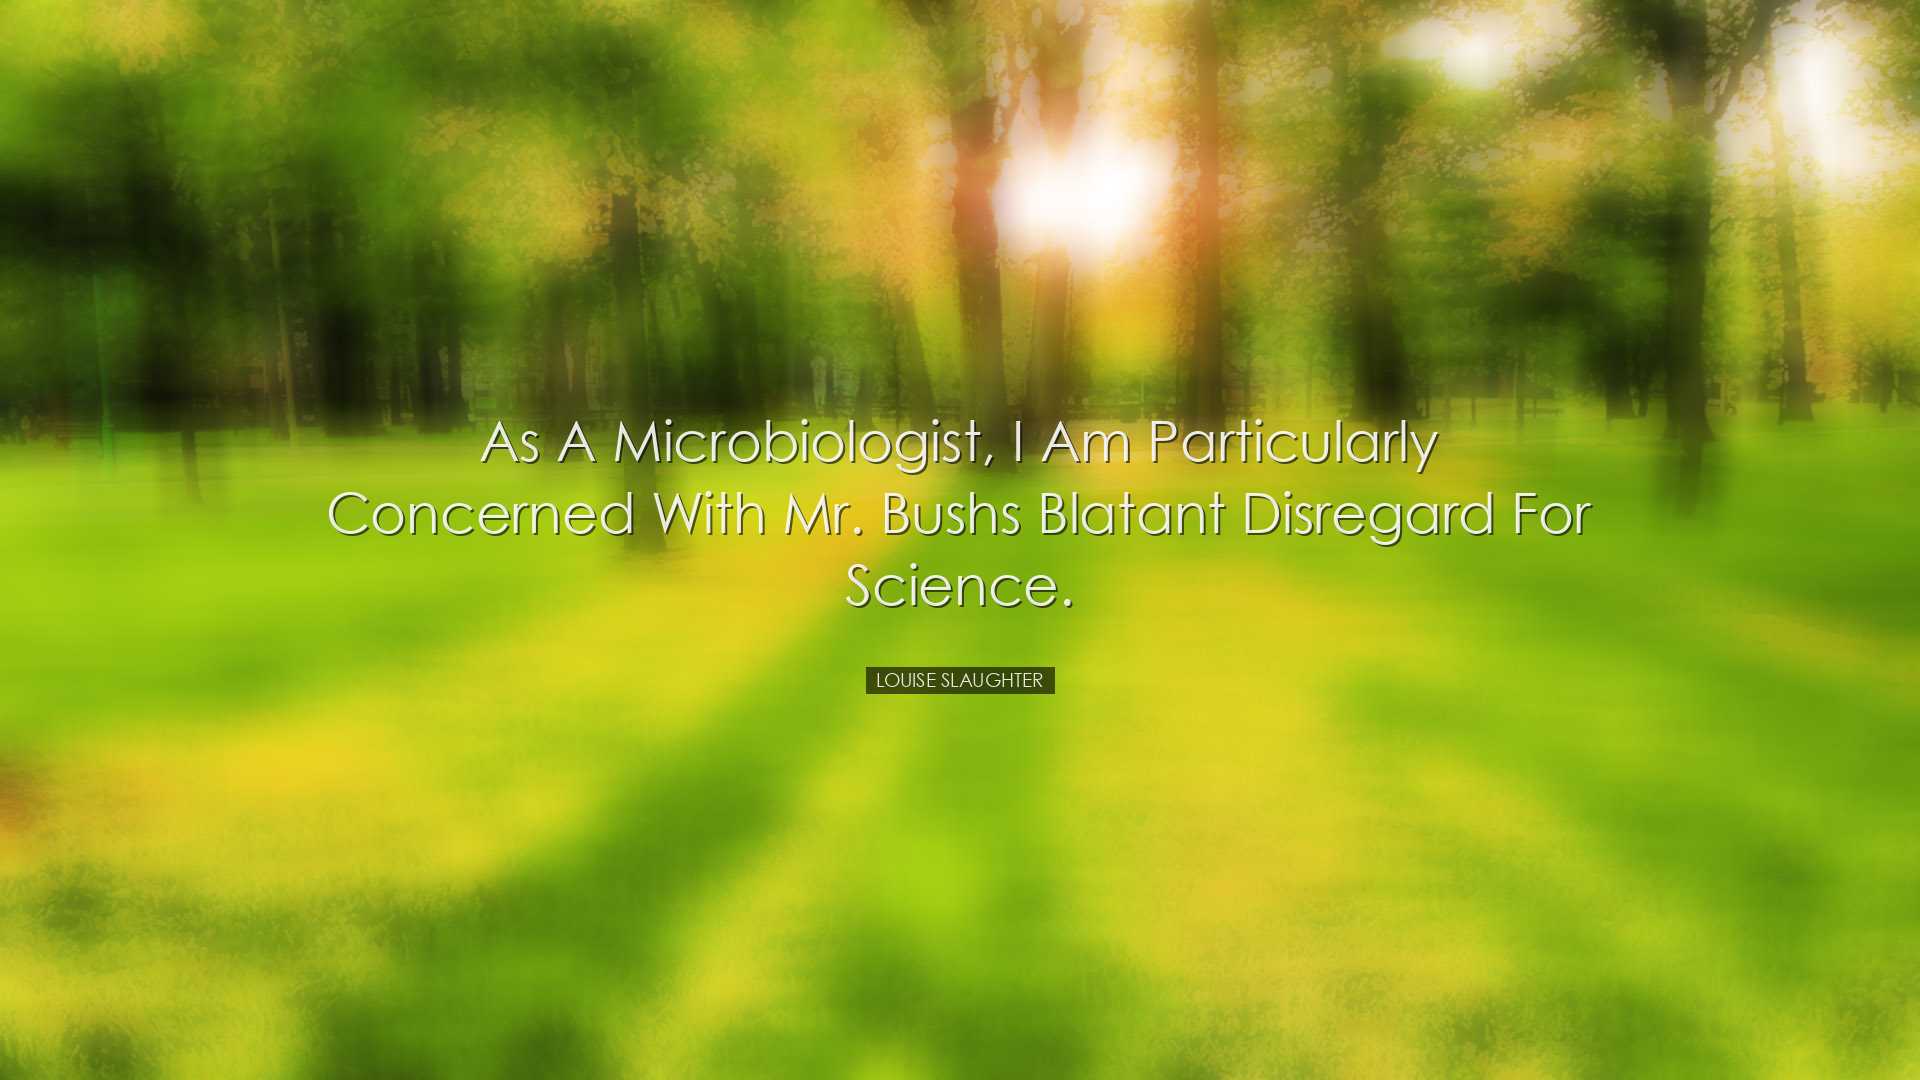 As a microbiologist, I am particularly concerned with Mr. Bushs bl